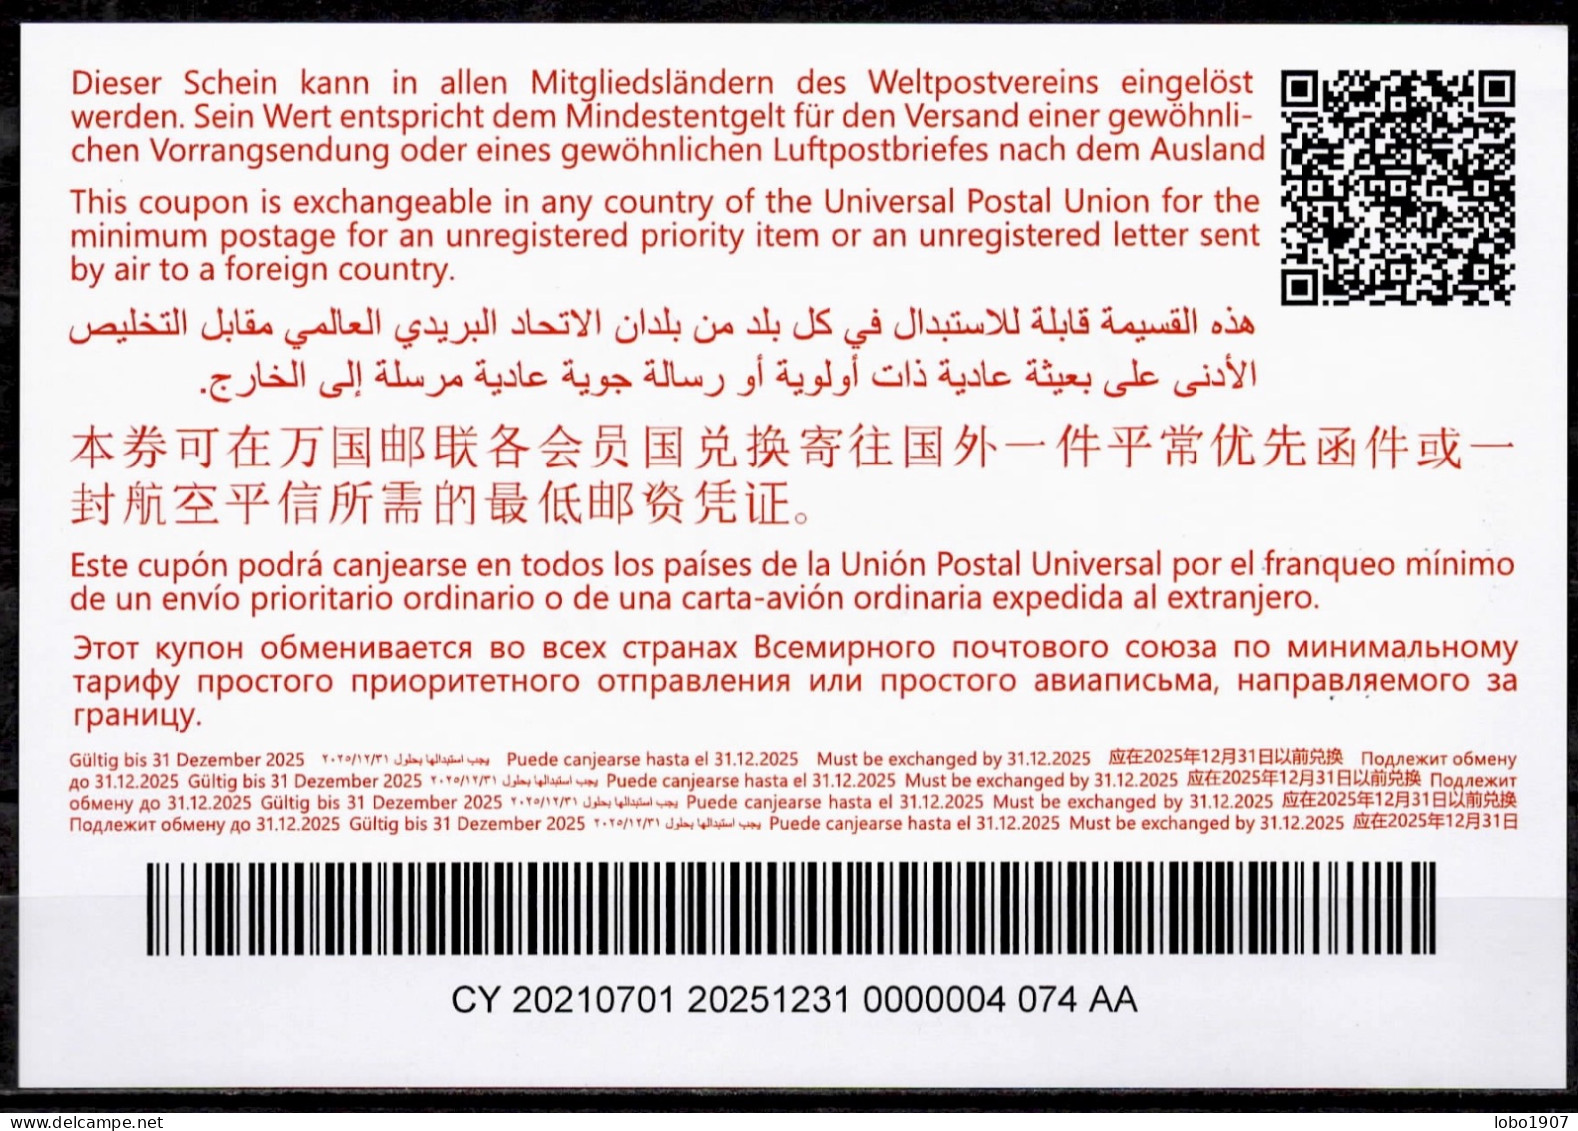 CHYPRE CYPRUS  Abidjan Type Ab47  20210701 AA  Int. Reply Coupon Reponse Antwortschein  IRC IAS  LEFKOSIA 01.09.2021 FD! - Lettres & Documents